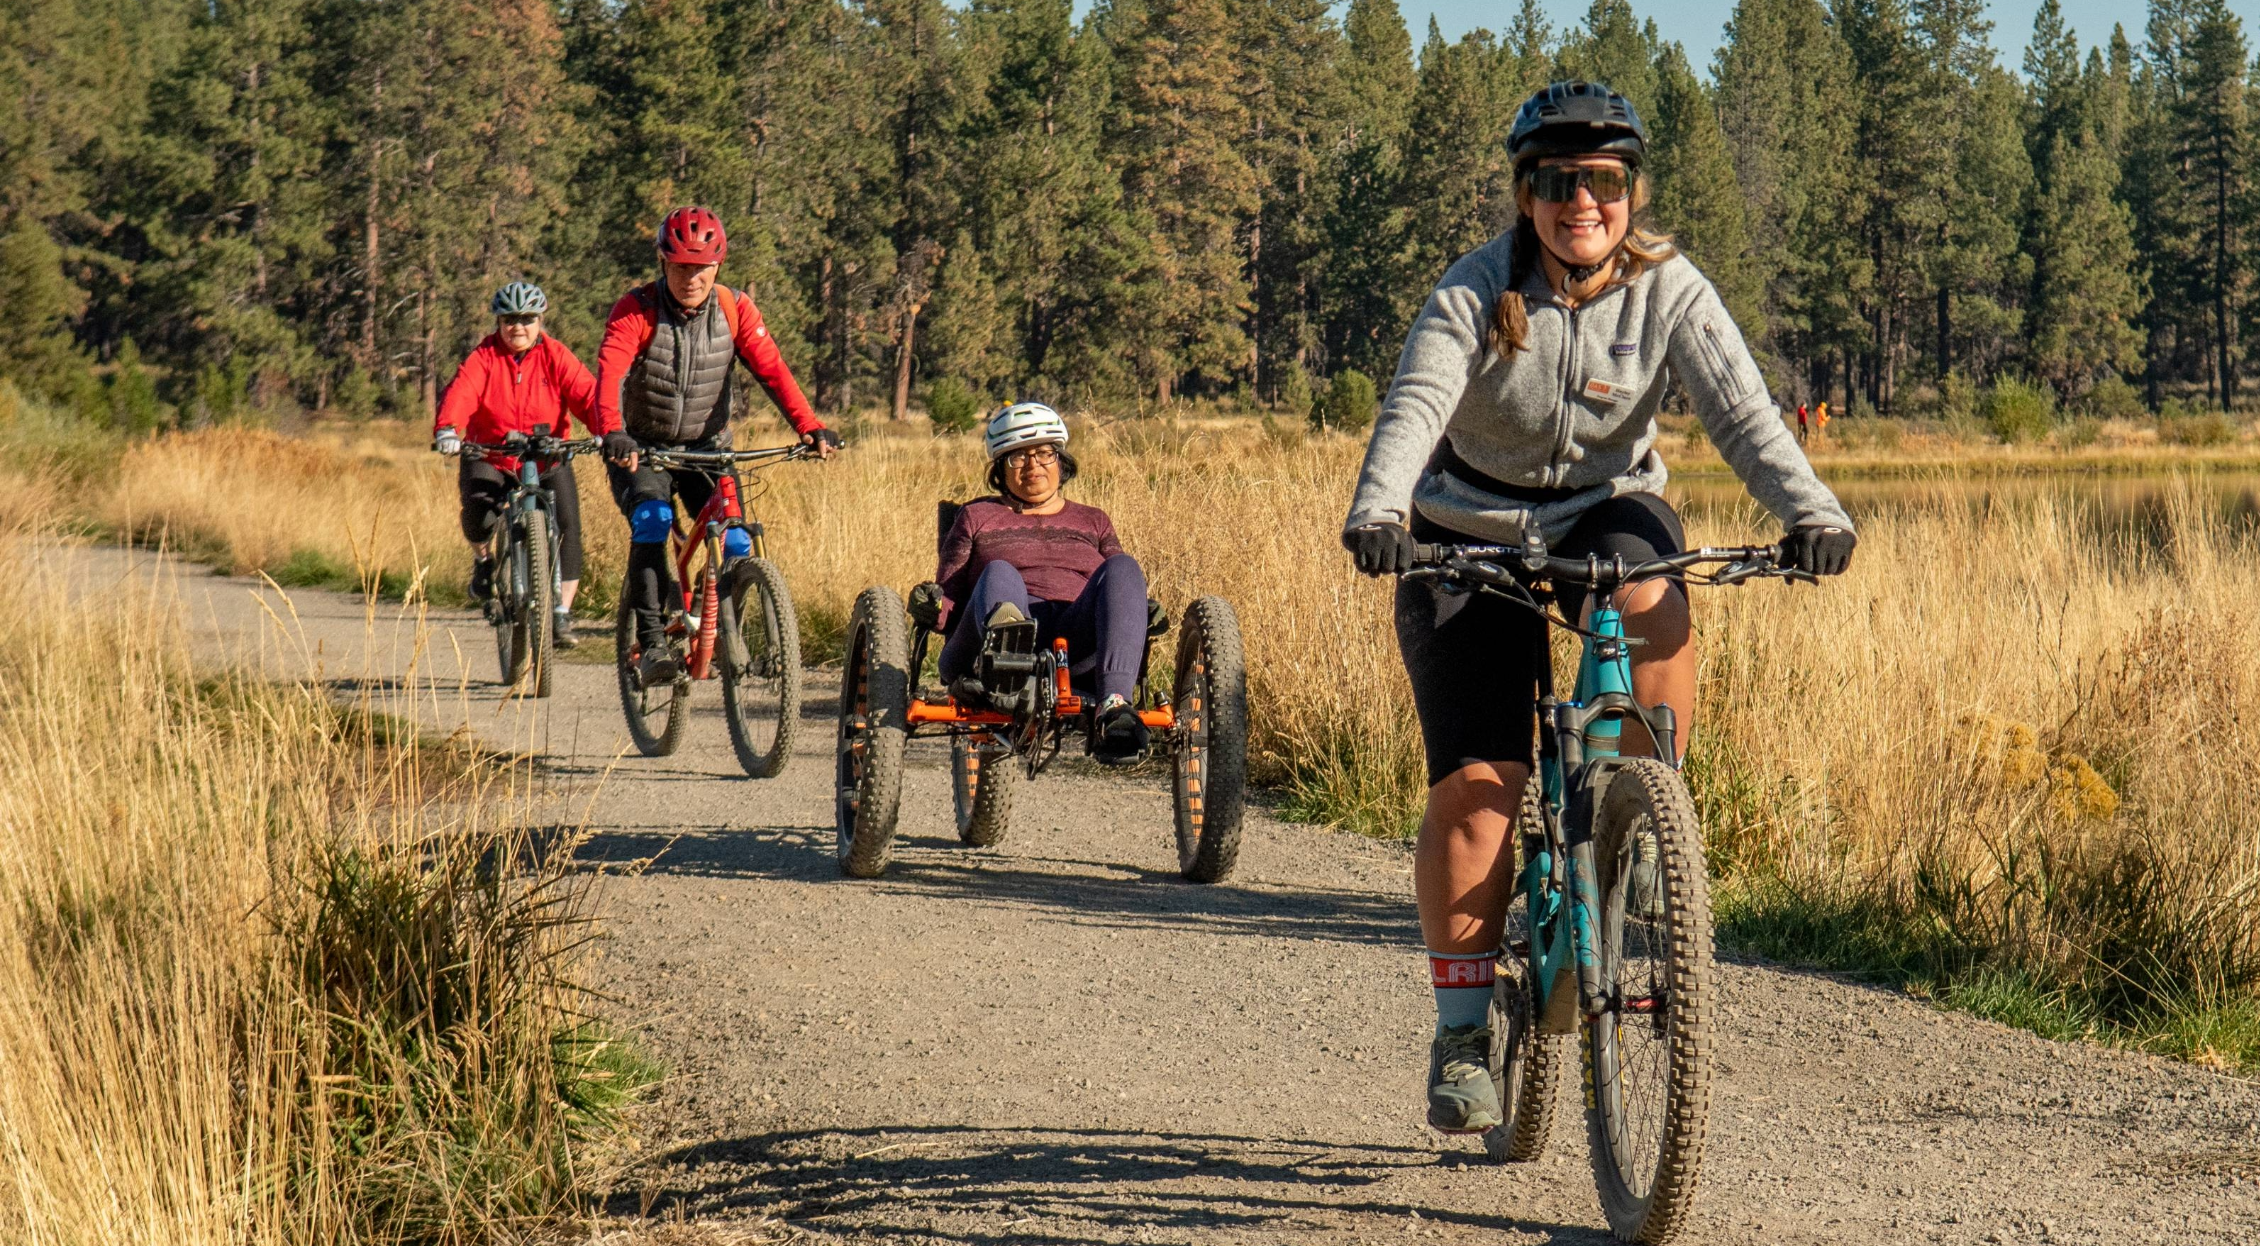 Three OAS volunteers guide an adaptive athlete in an off-road recumbent bike down a gravel path lined with tall dry grass